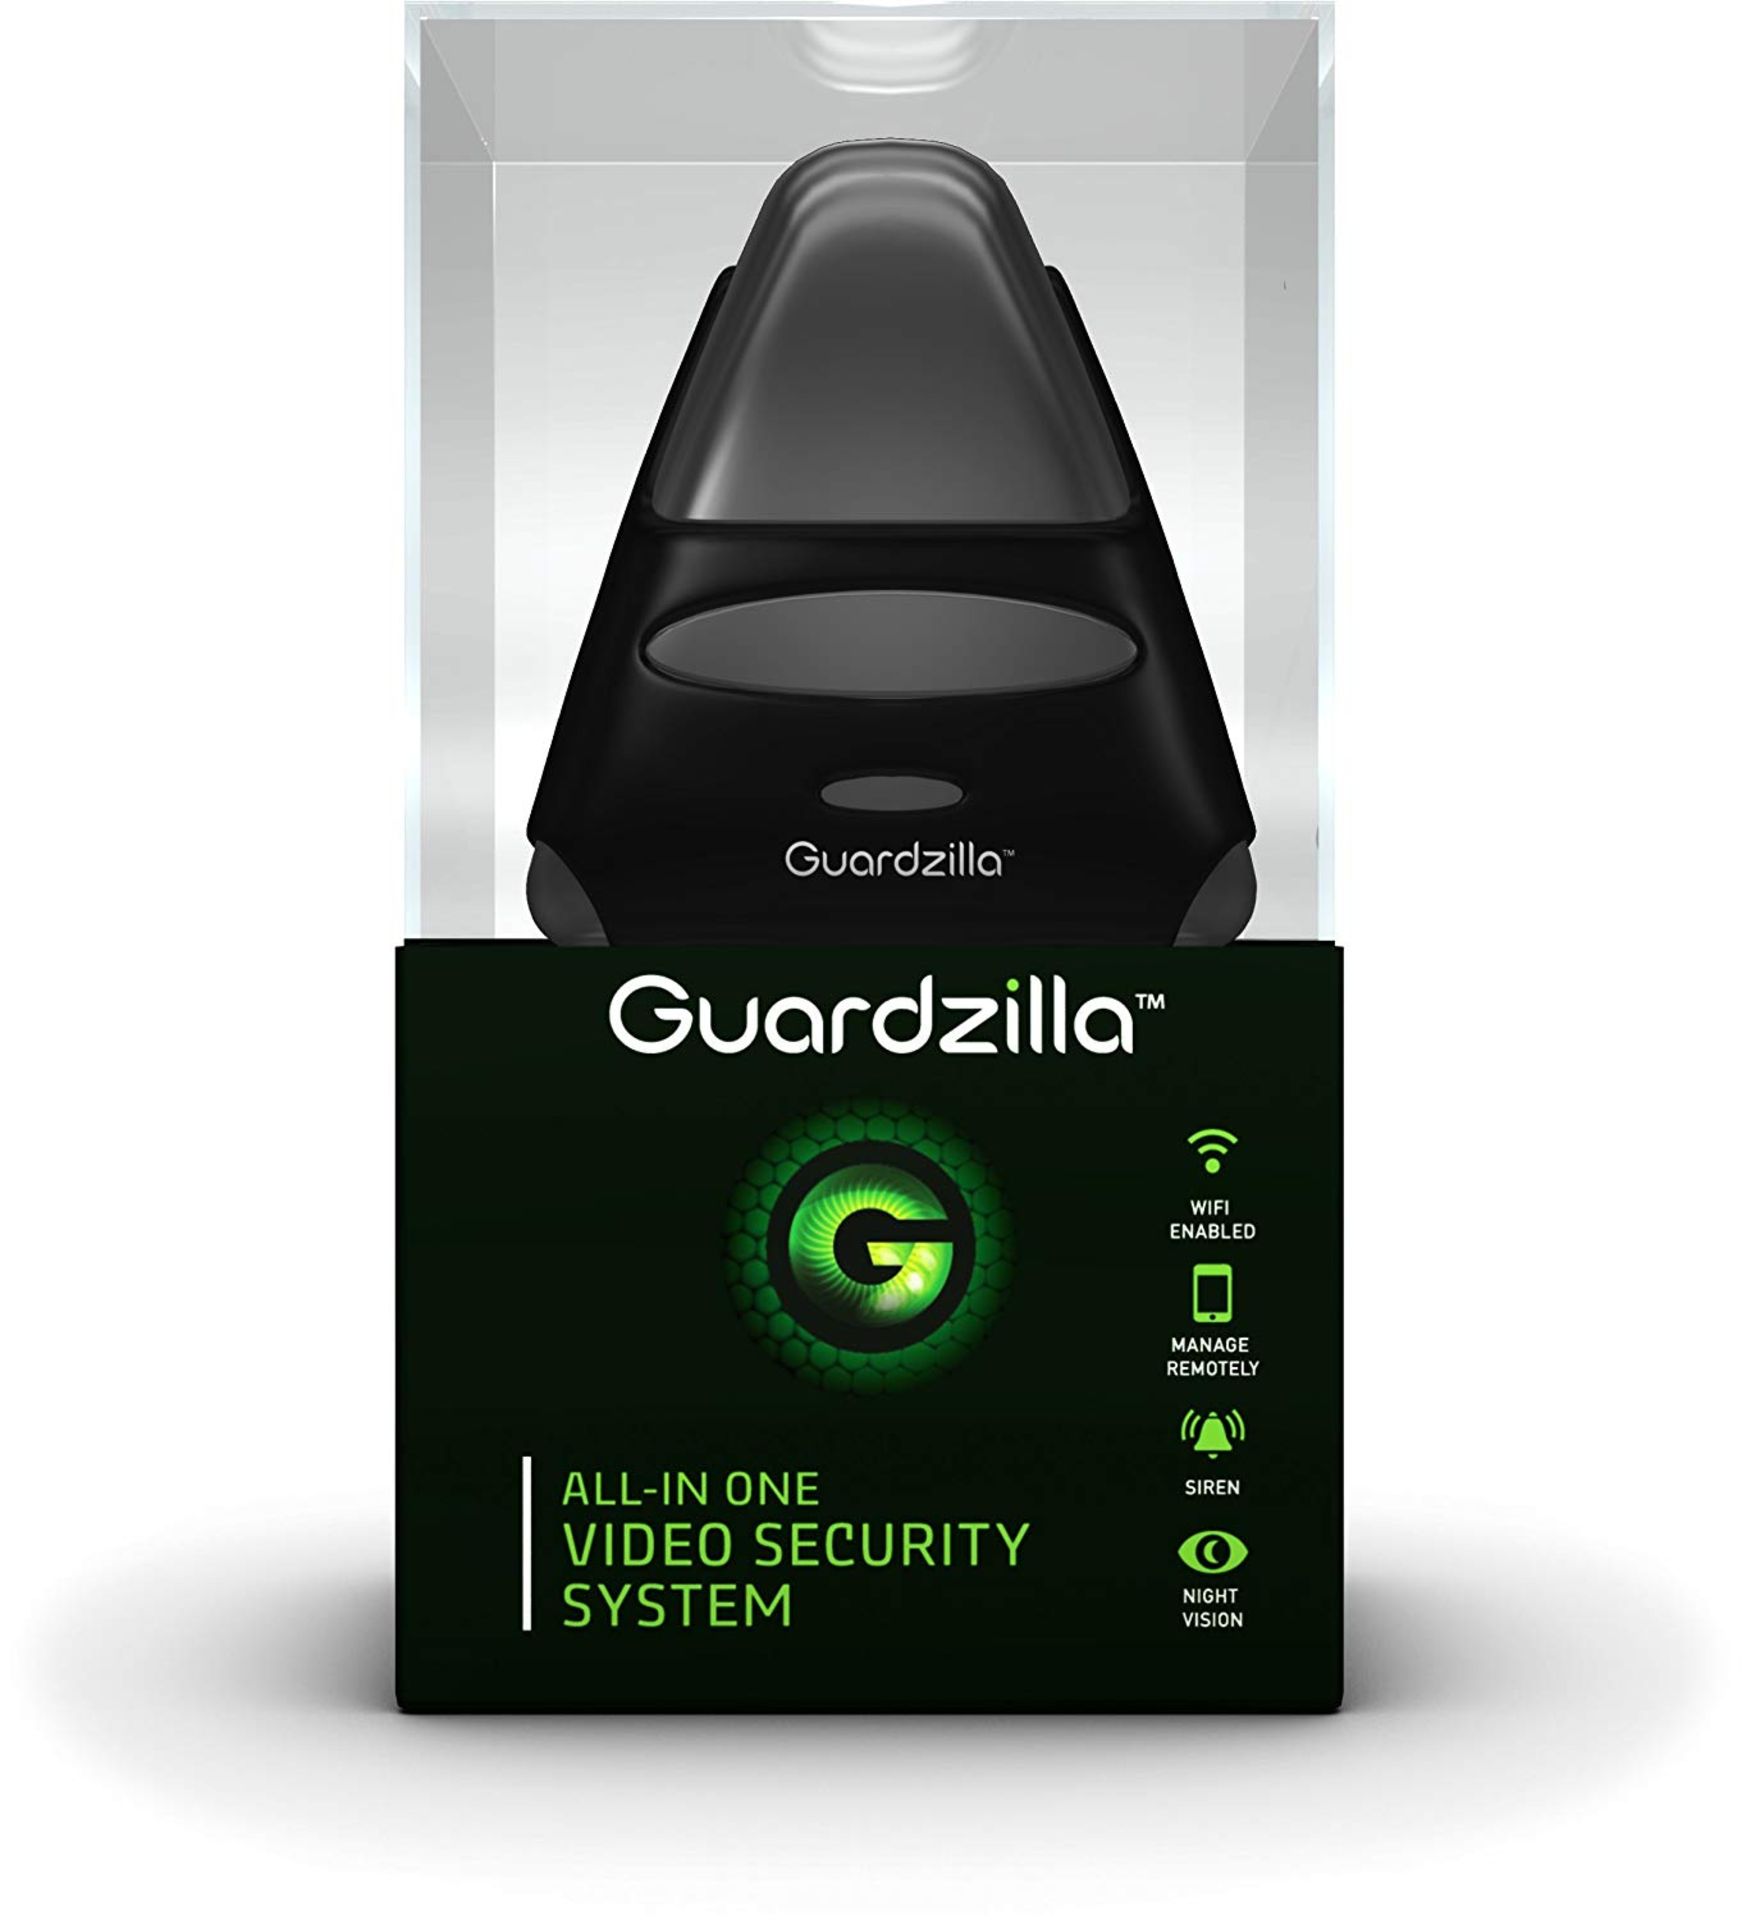 V Brand New Guardzilla All-In-One HD Security System Including Camera + Siren + Smartphone Remote - Image 2 of 2